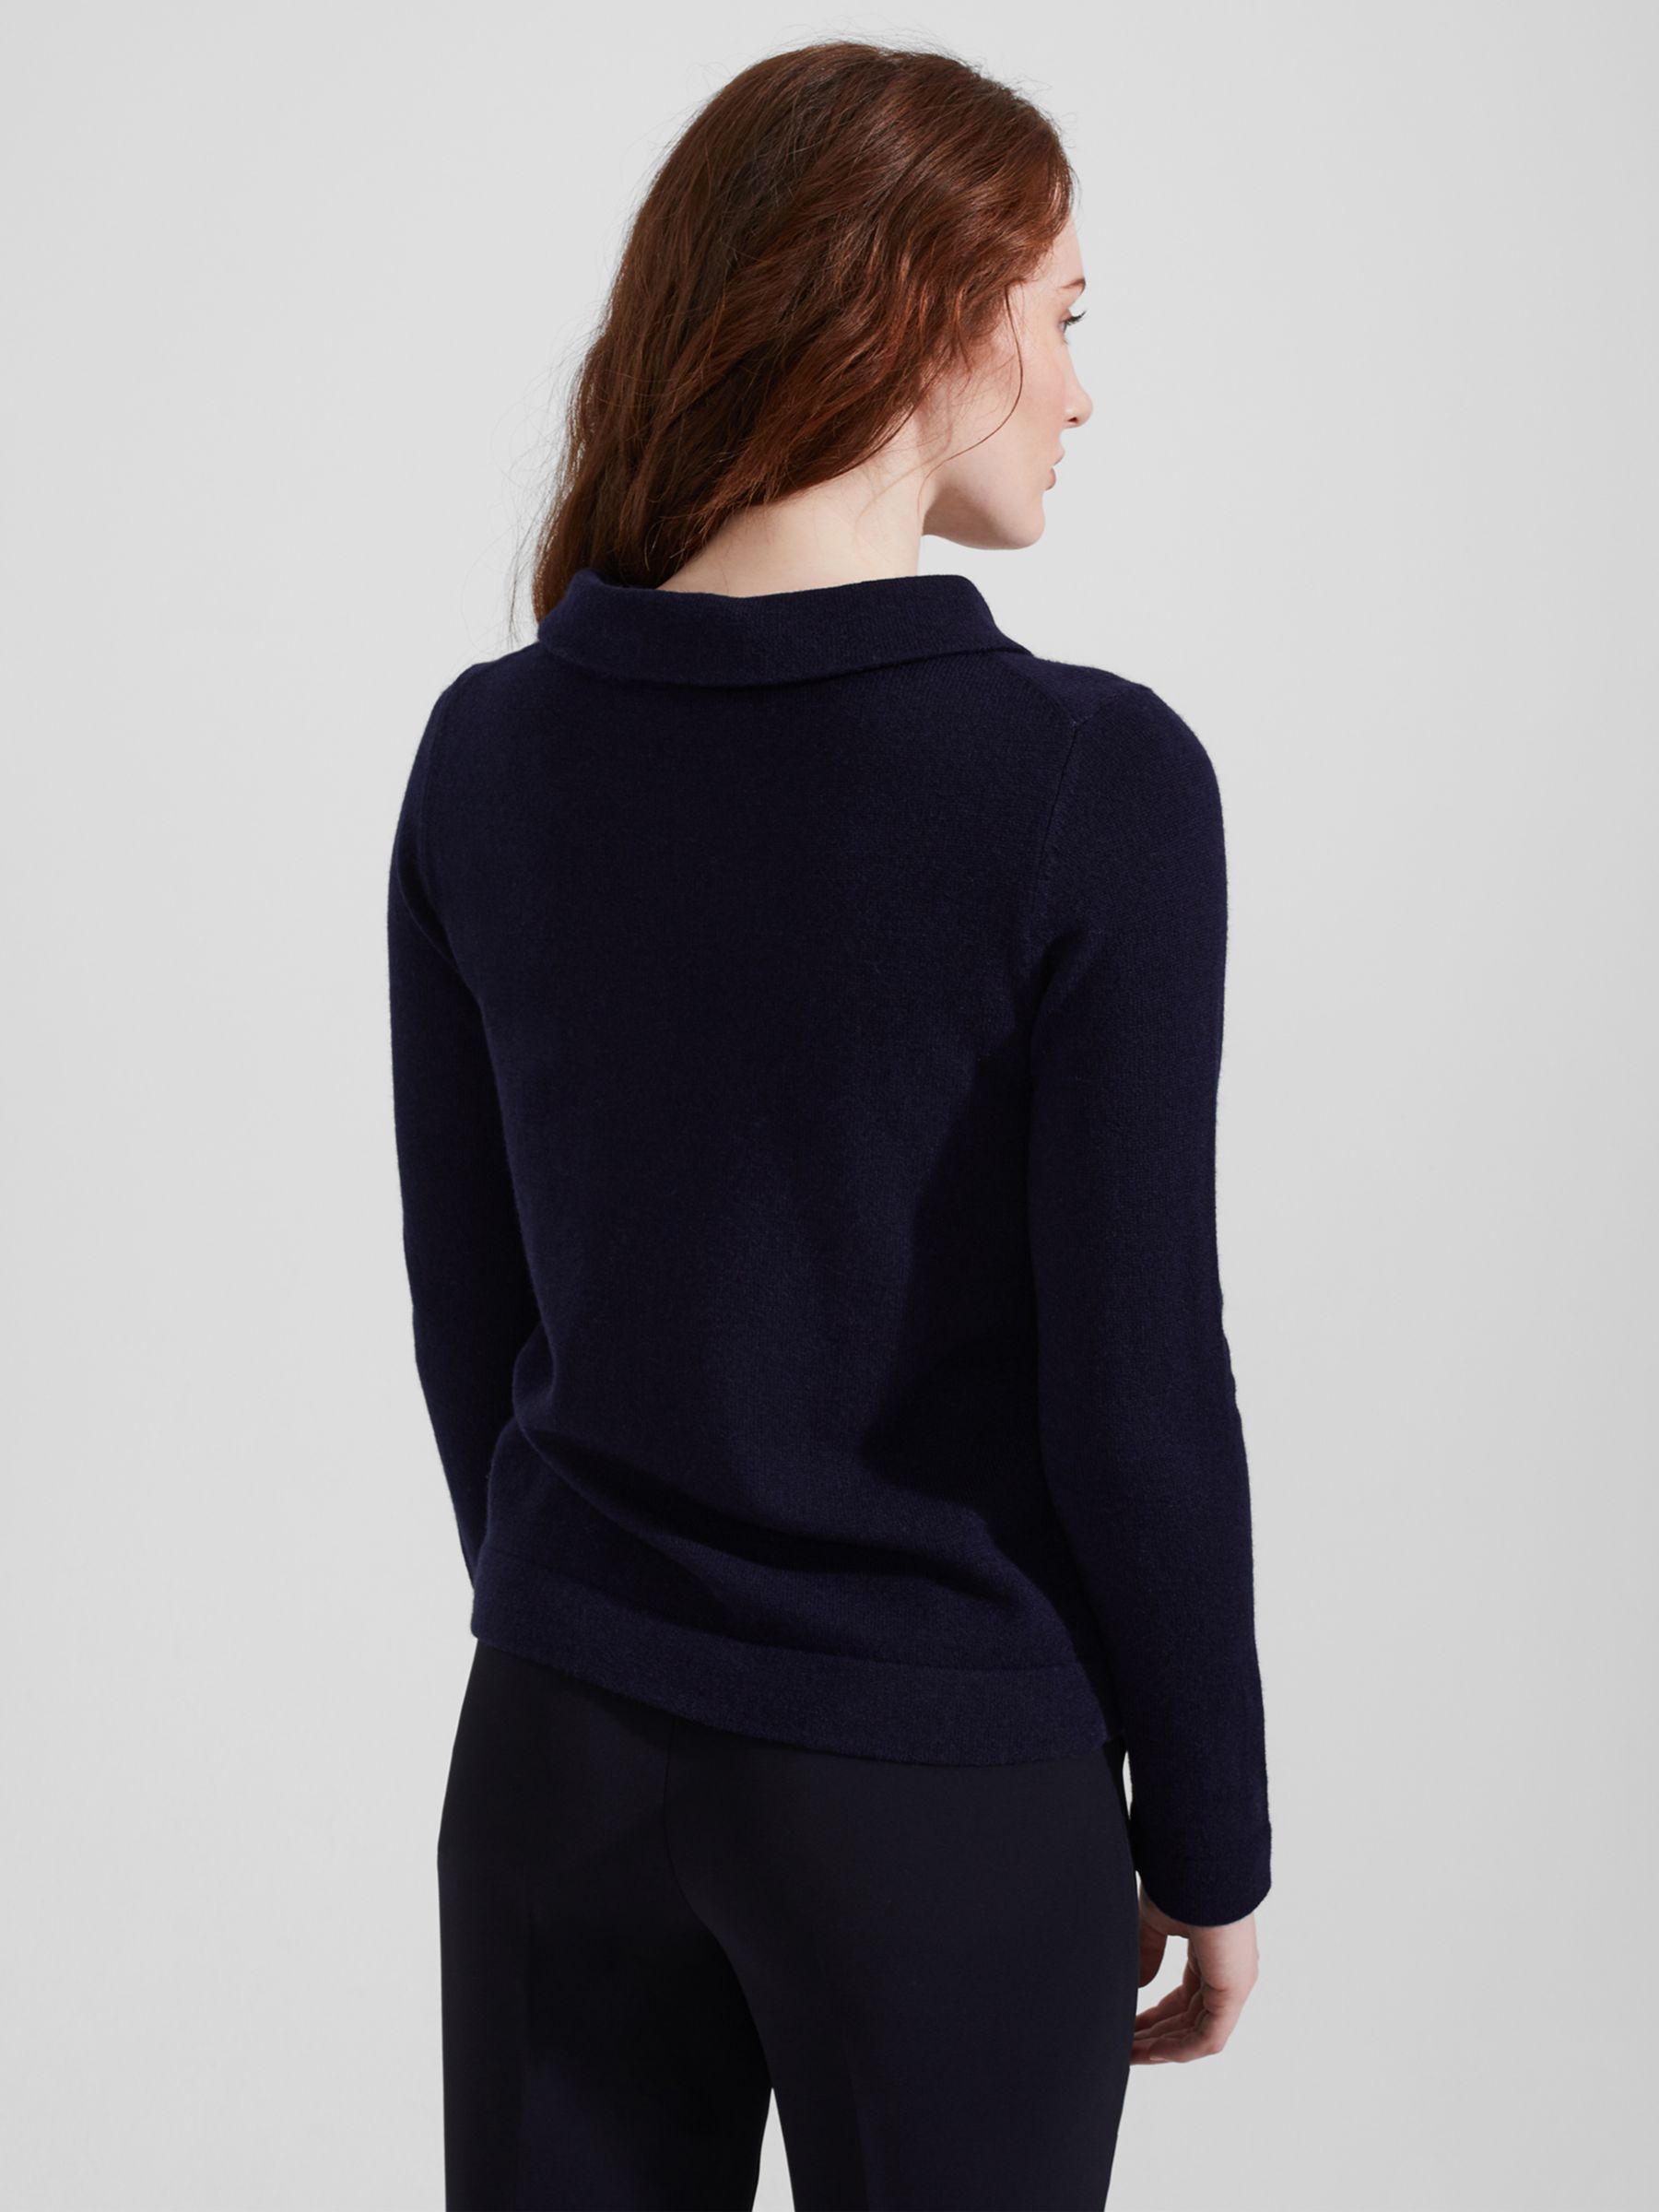 Hobbs Audrey Cashmere and Wool Jumper, Navy at John Lewis & Partners